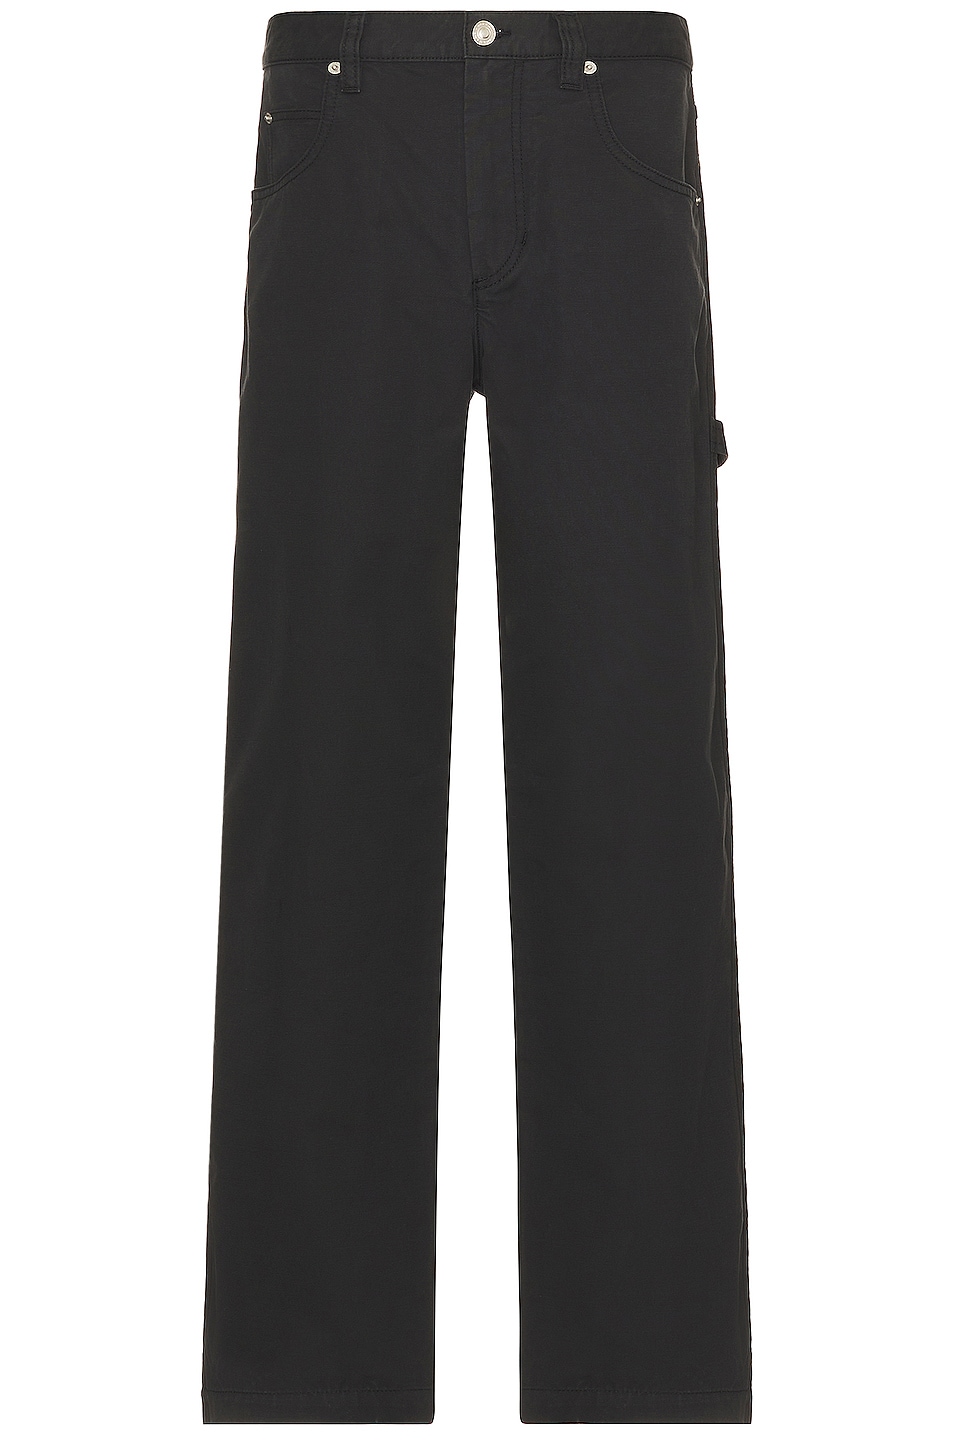 Image 1 of Isabel Marant Pablo Pants in Faded Black